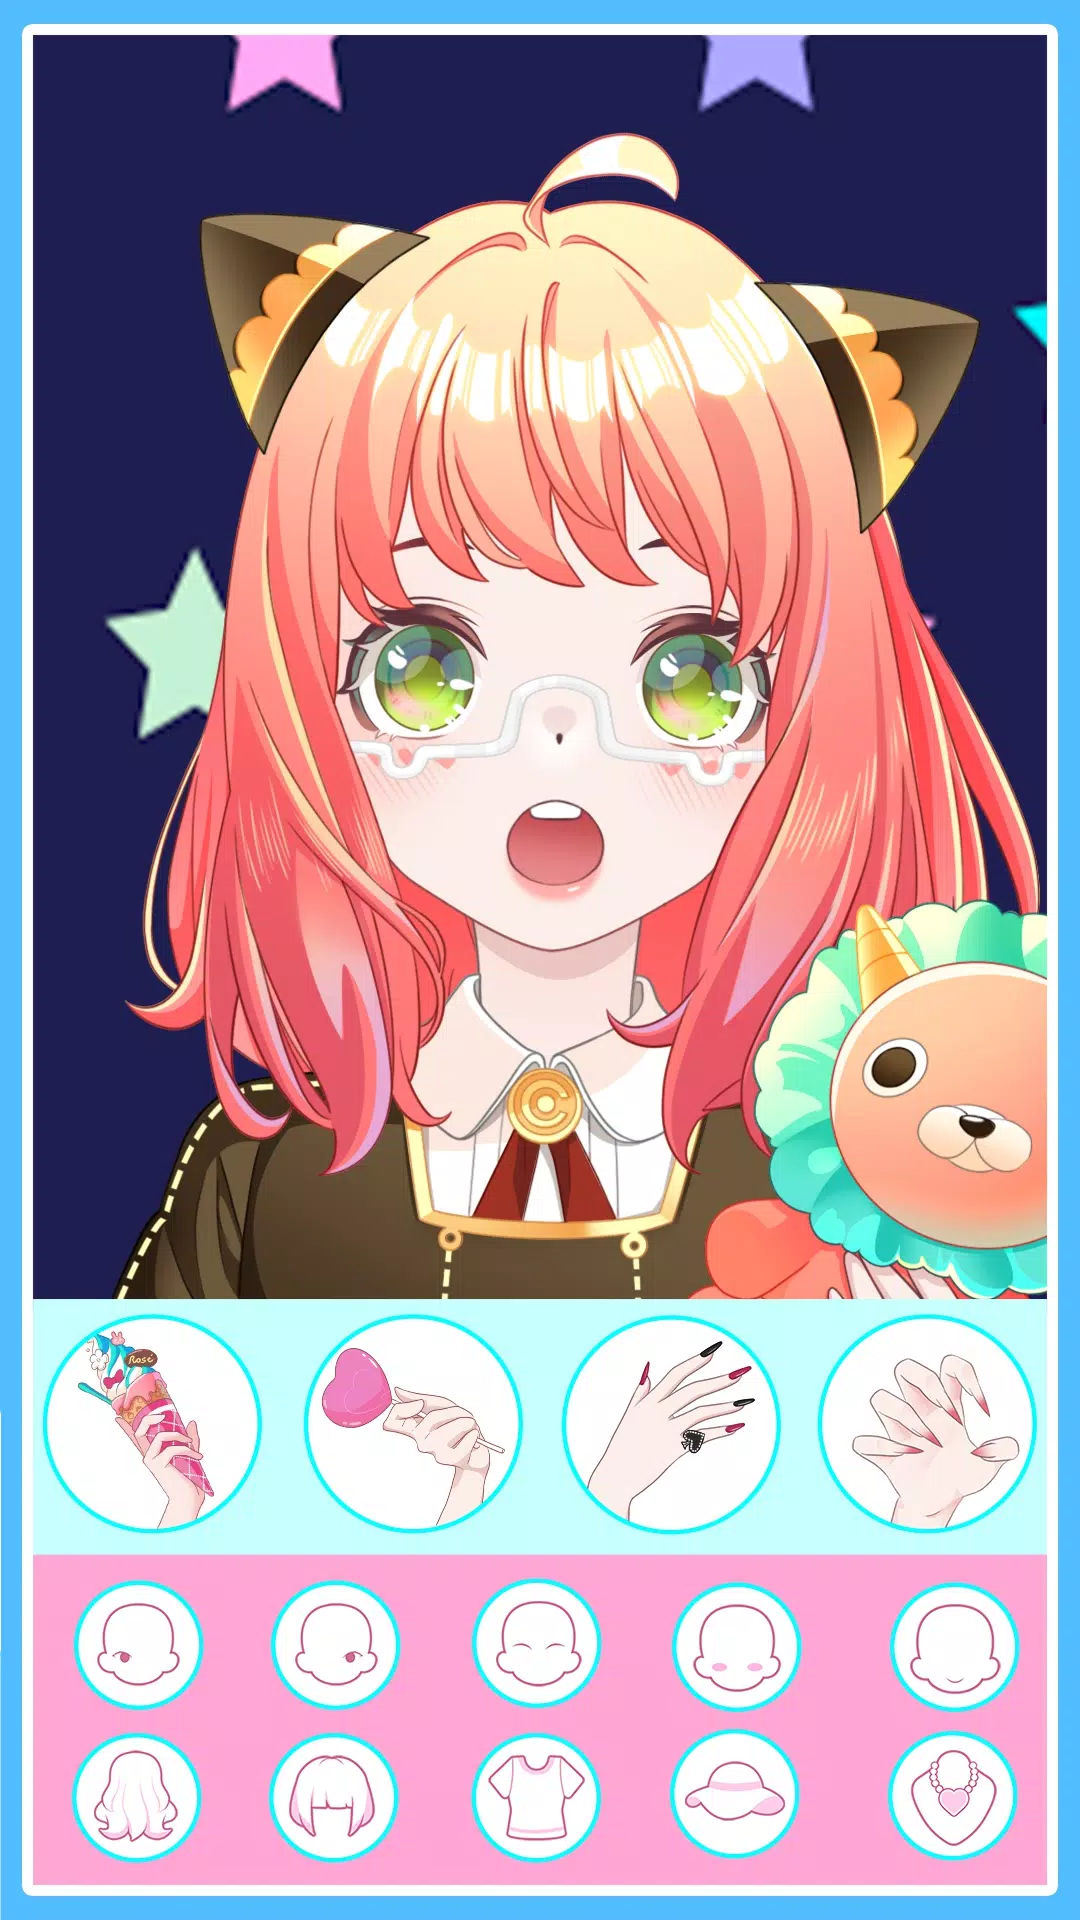 Download Anime Avatar Maker Anime Doll Apk 1.3 for Android iOs